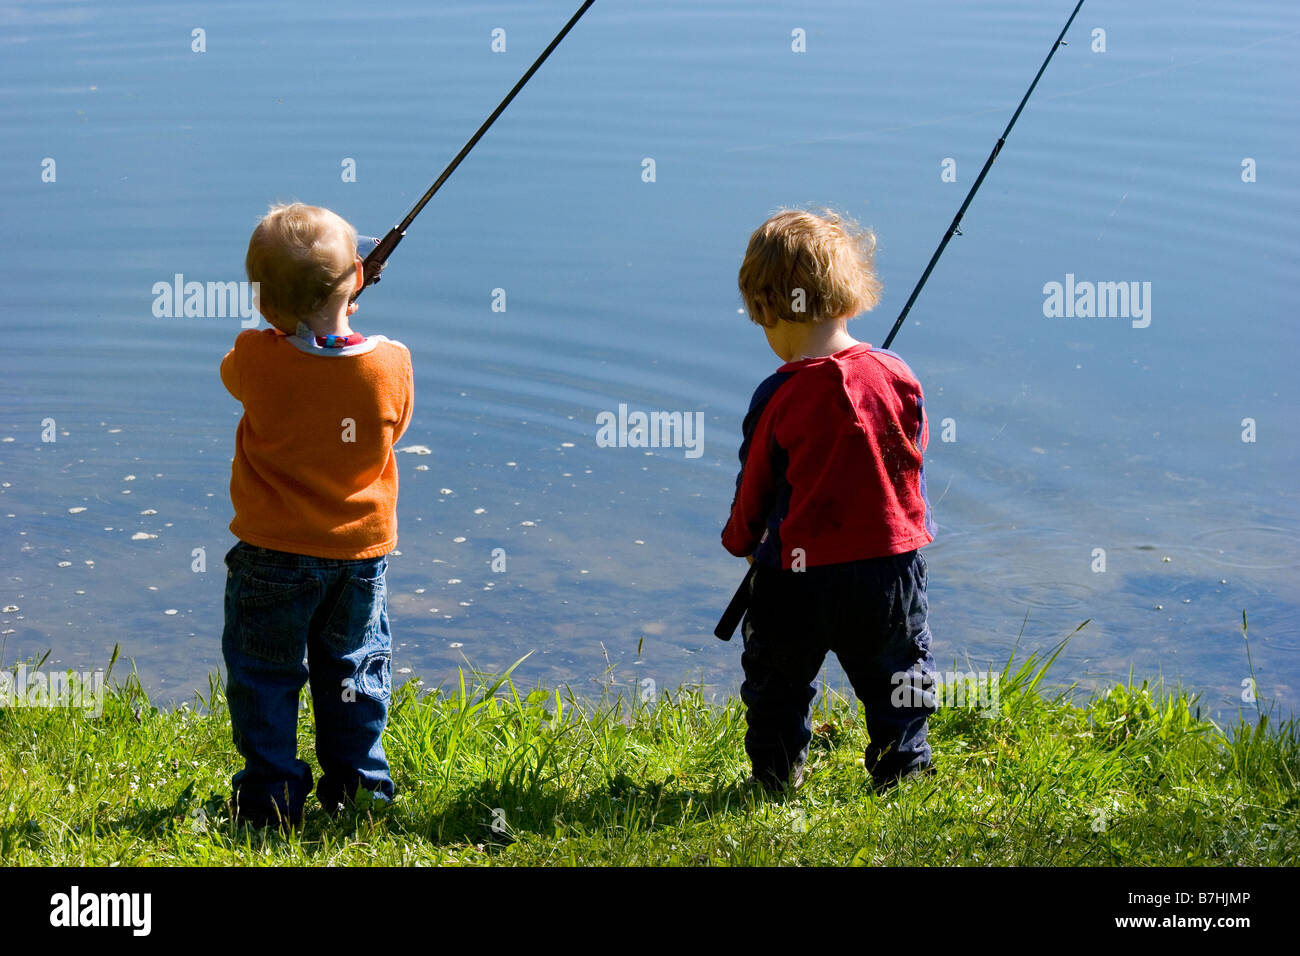 Two young boys fishing in a pond during a fishing derby Stock Photo - Alamy